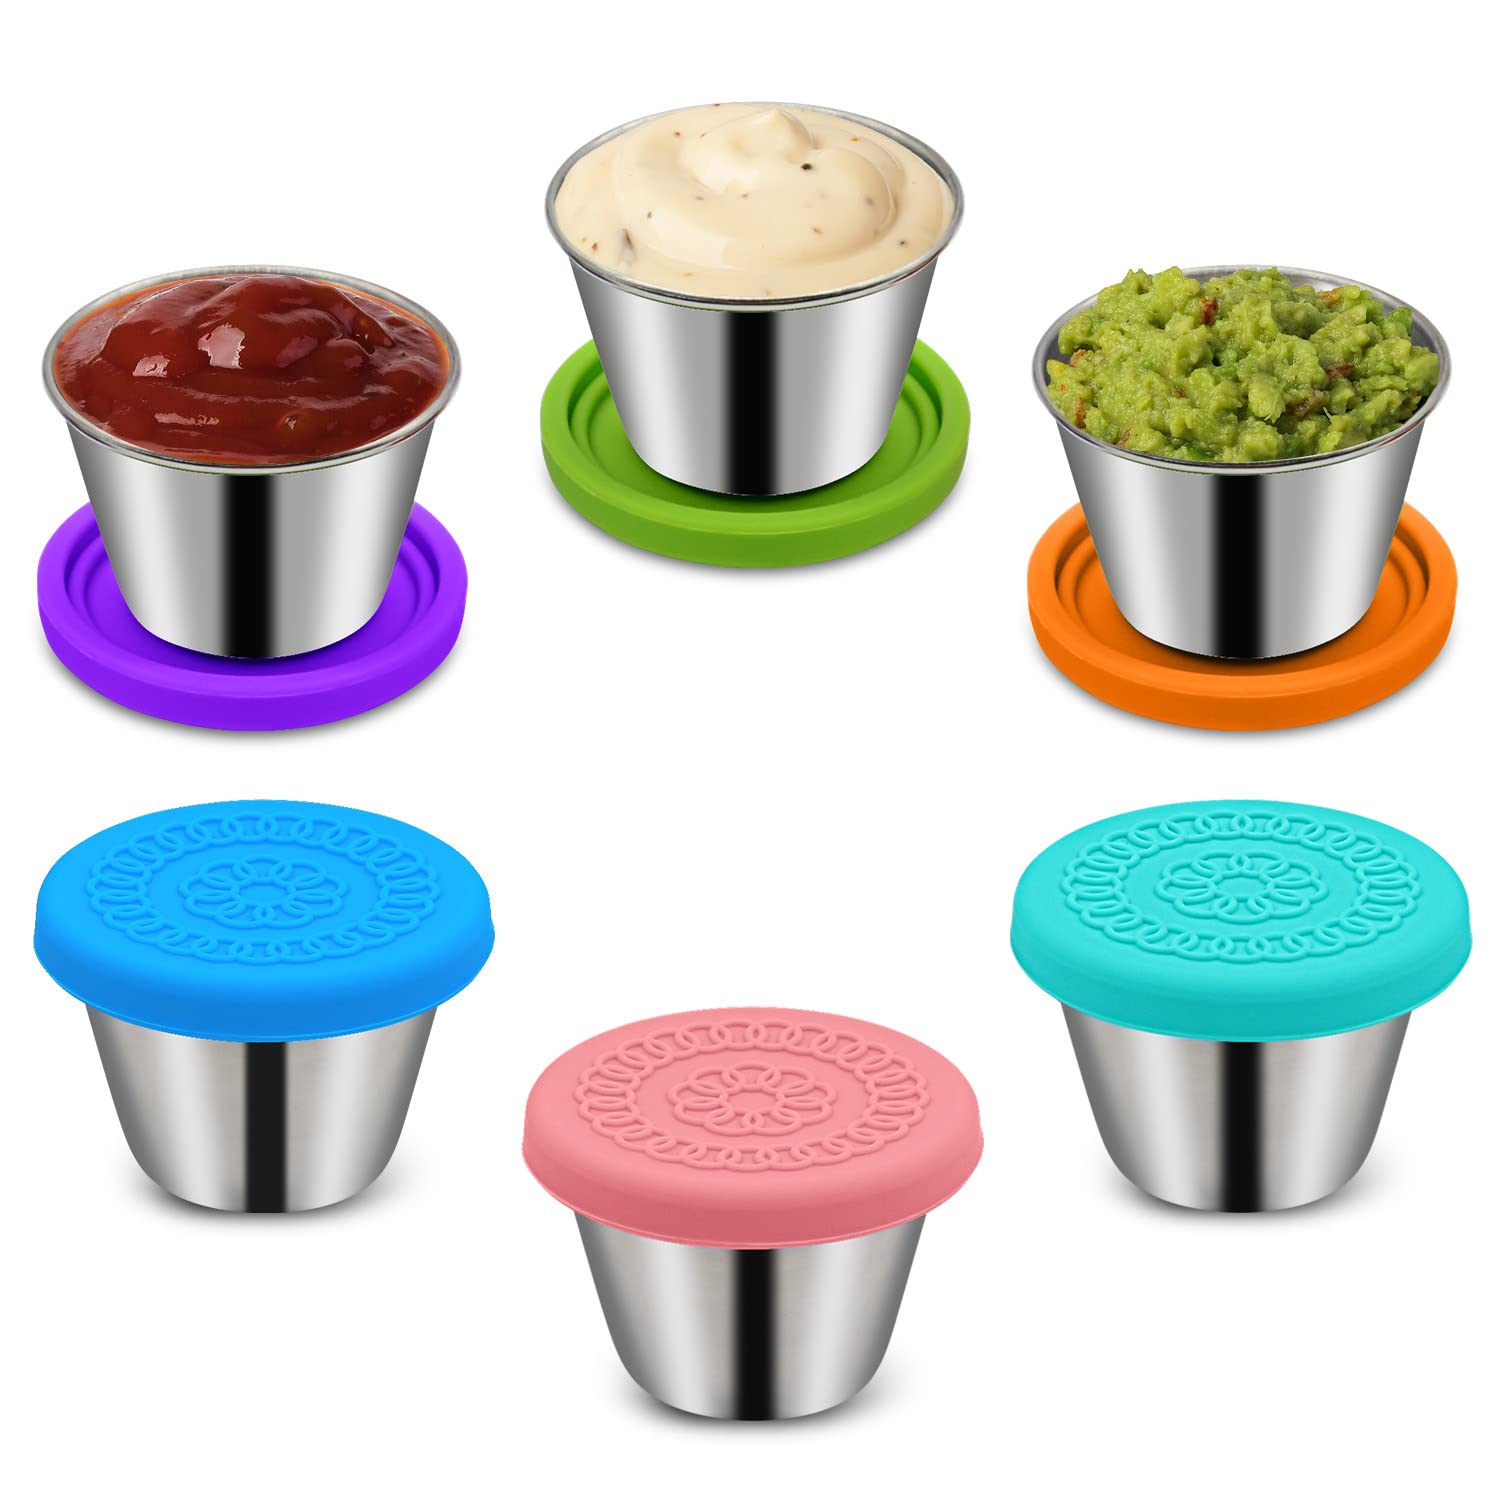 6Pack 2.4oz Small Condiment Containers with Lids, Salad Dressing Conta